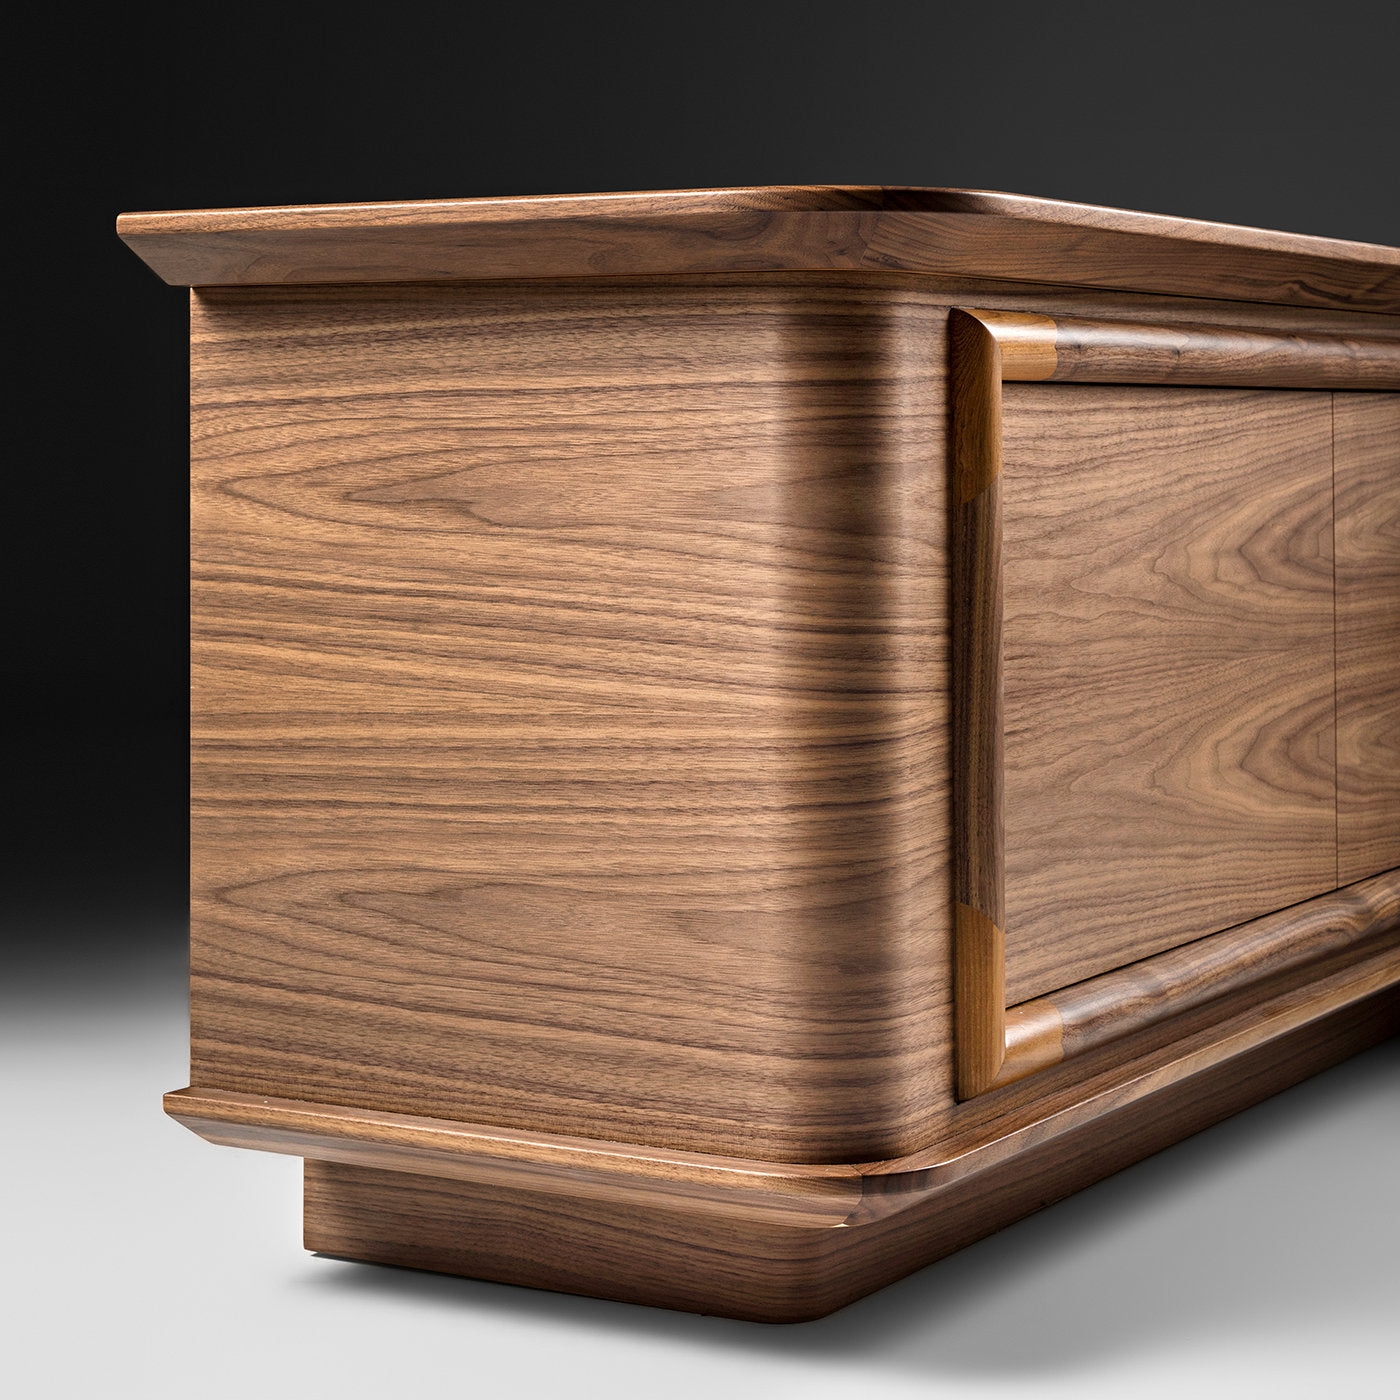 Parlato Media Sideboard by Luciano Colombo - Alternative view 2